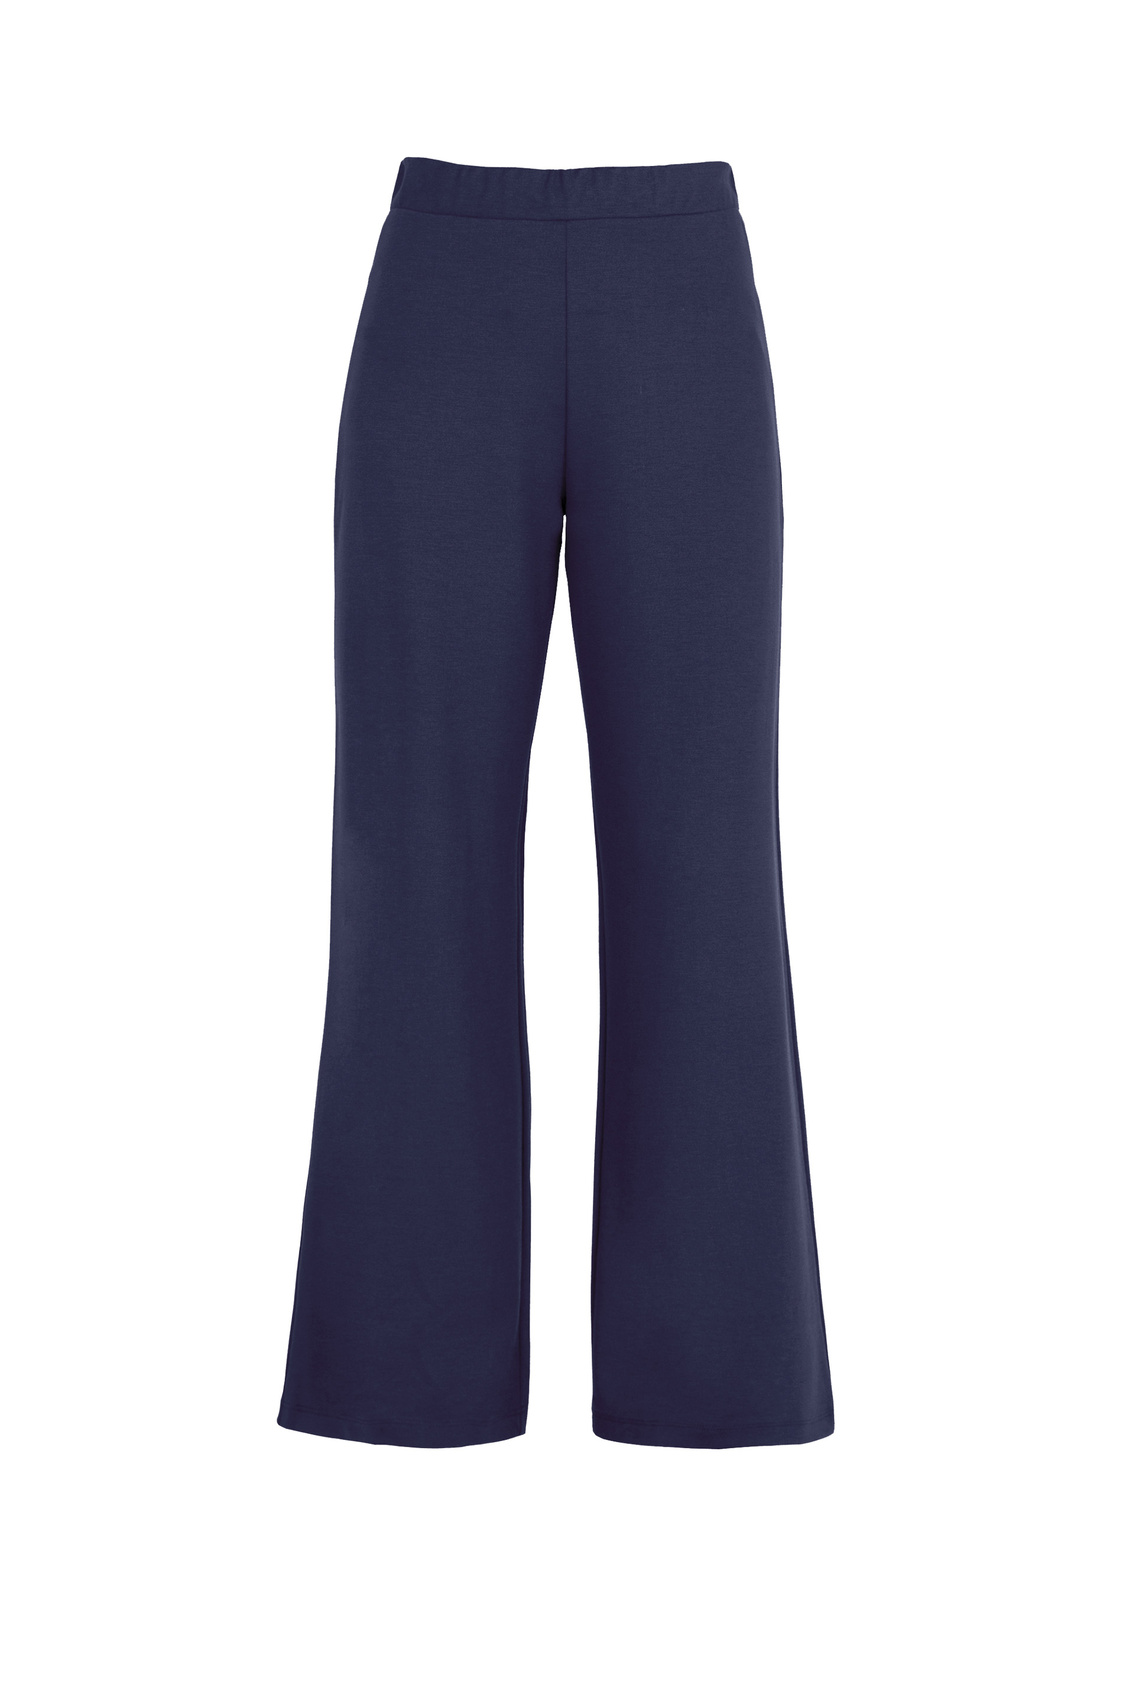 42757_wide-ponte-trousers_blueberry.jpg